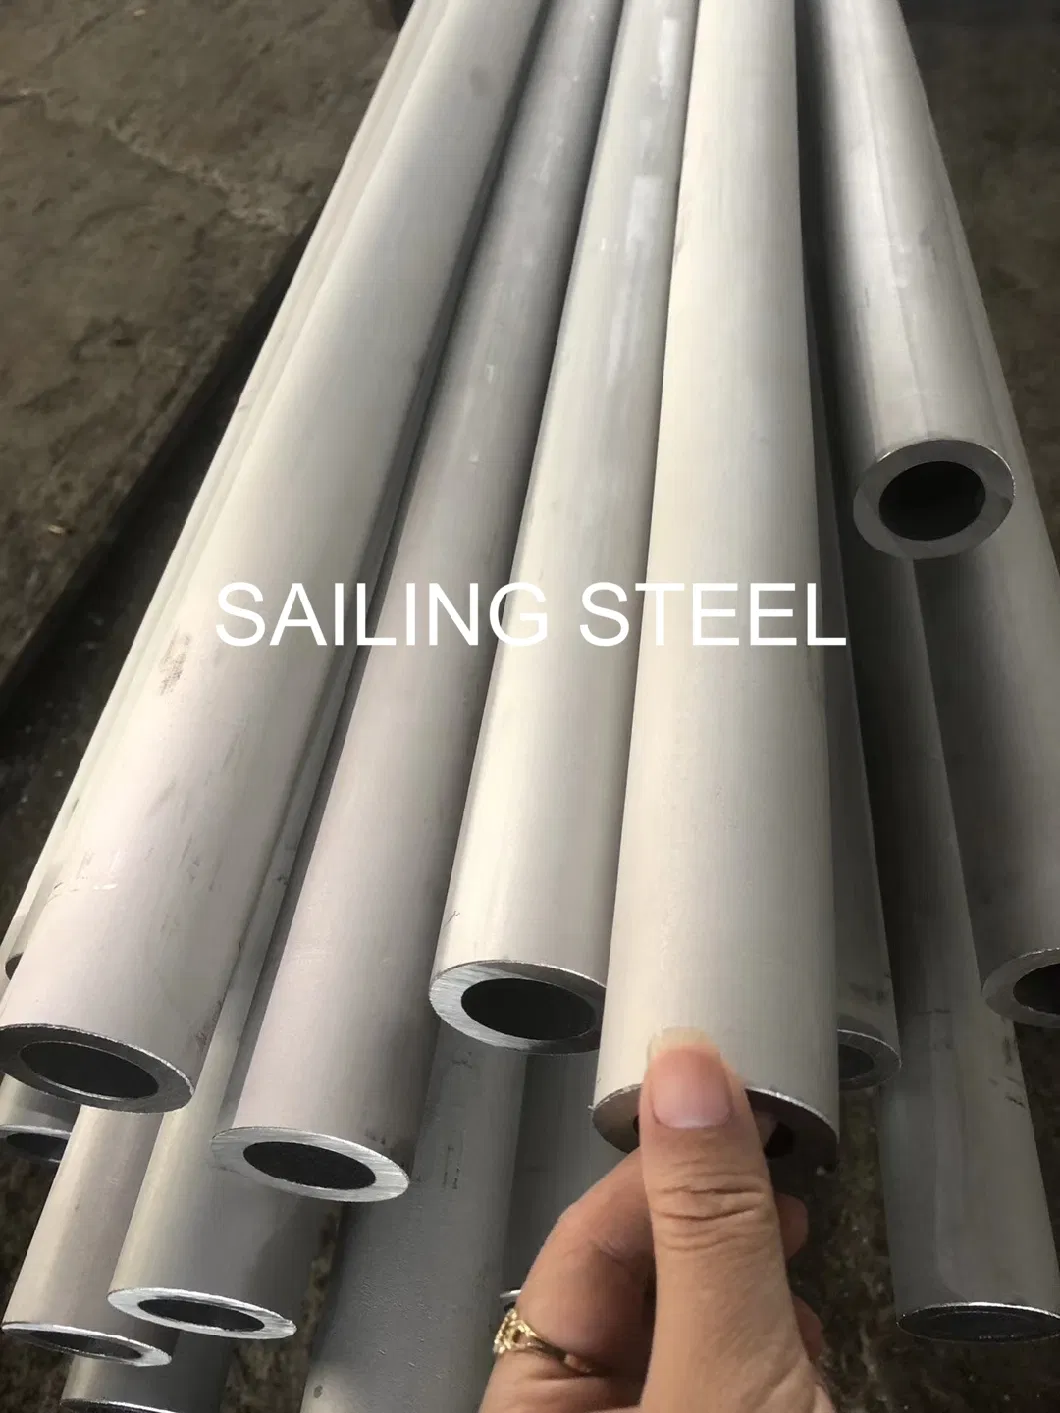 Large Diameter Welded/Seamless Stainless Steel Pipe Nickel-Based Alloy Pipe From Chinese Factory